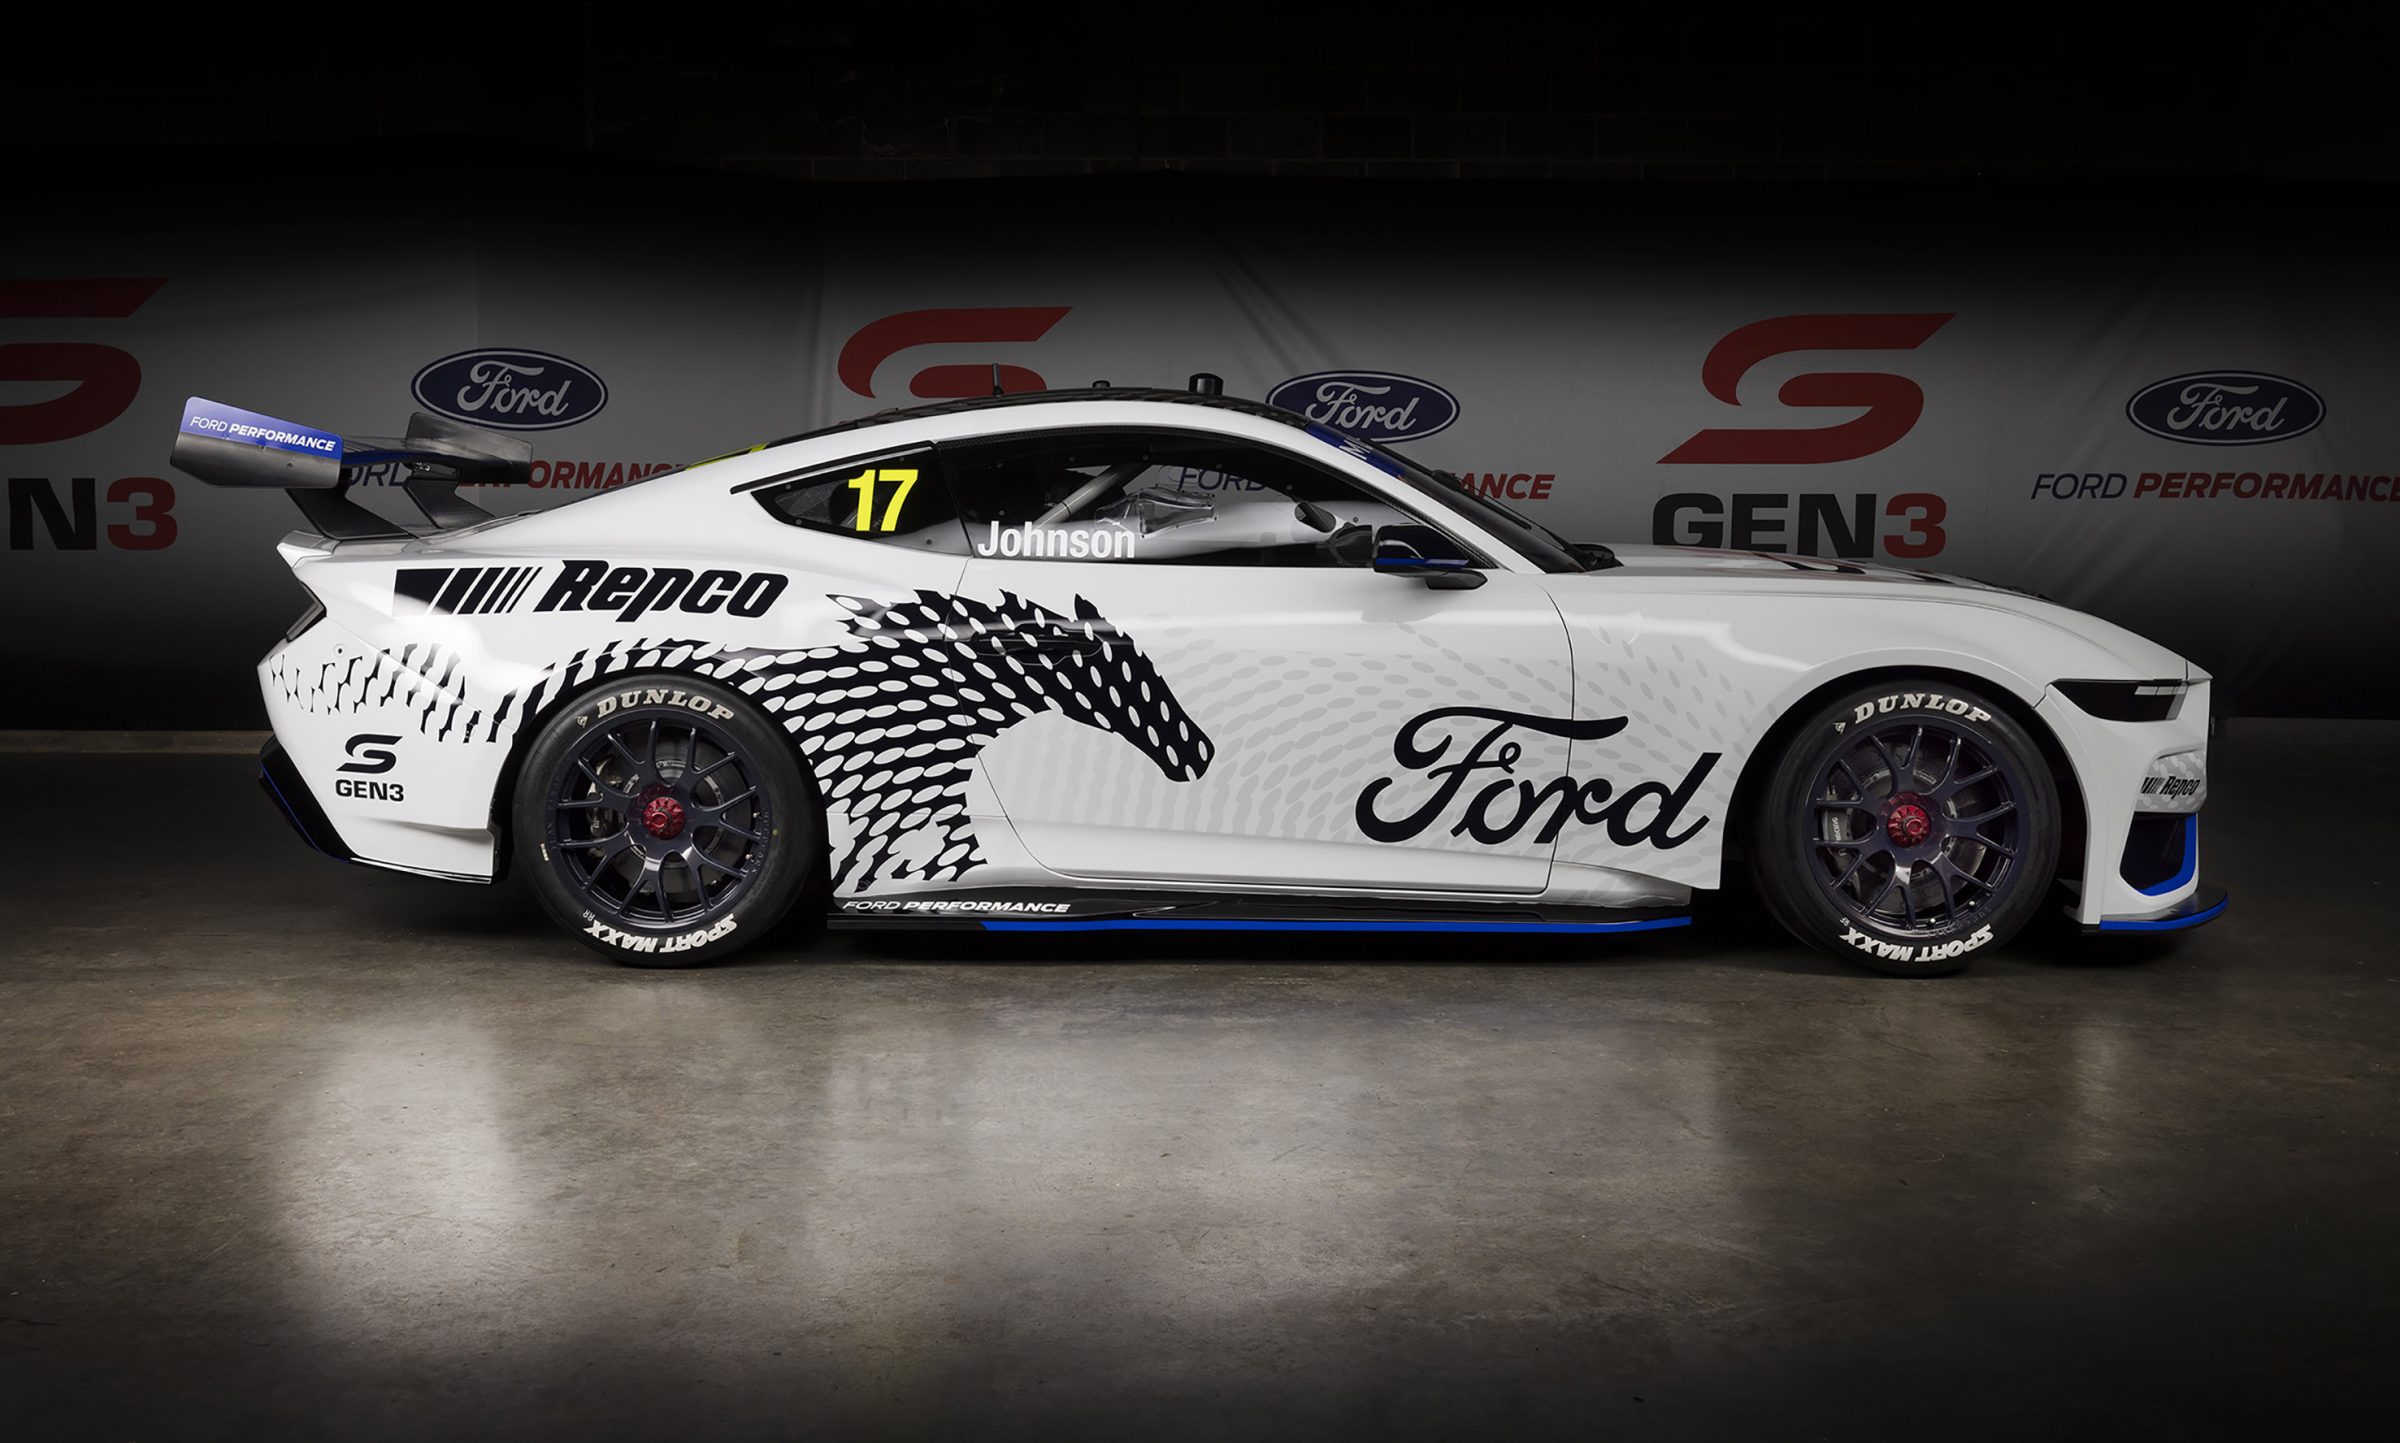 Meet the first racing model of the new generation Ford Mustang TRACEDNEWS